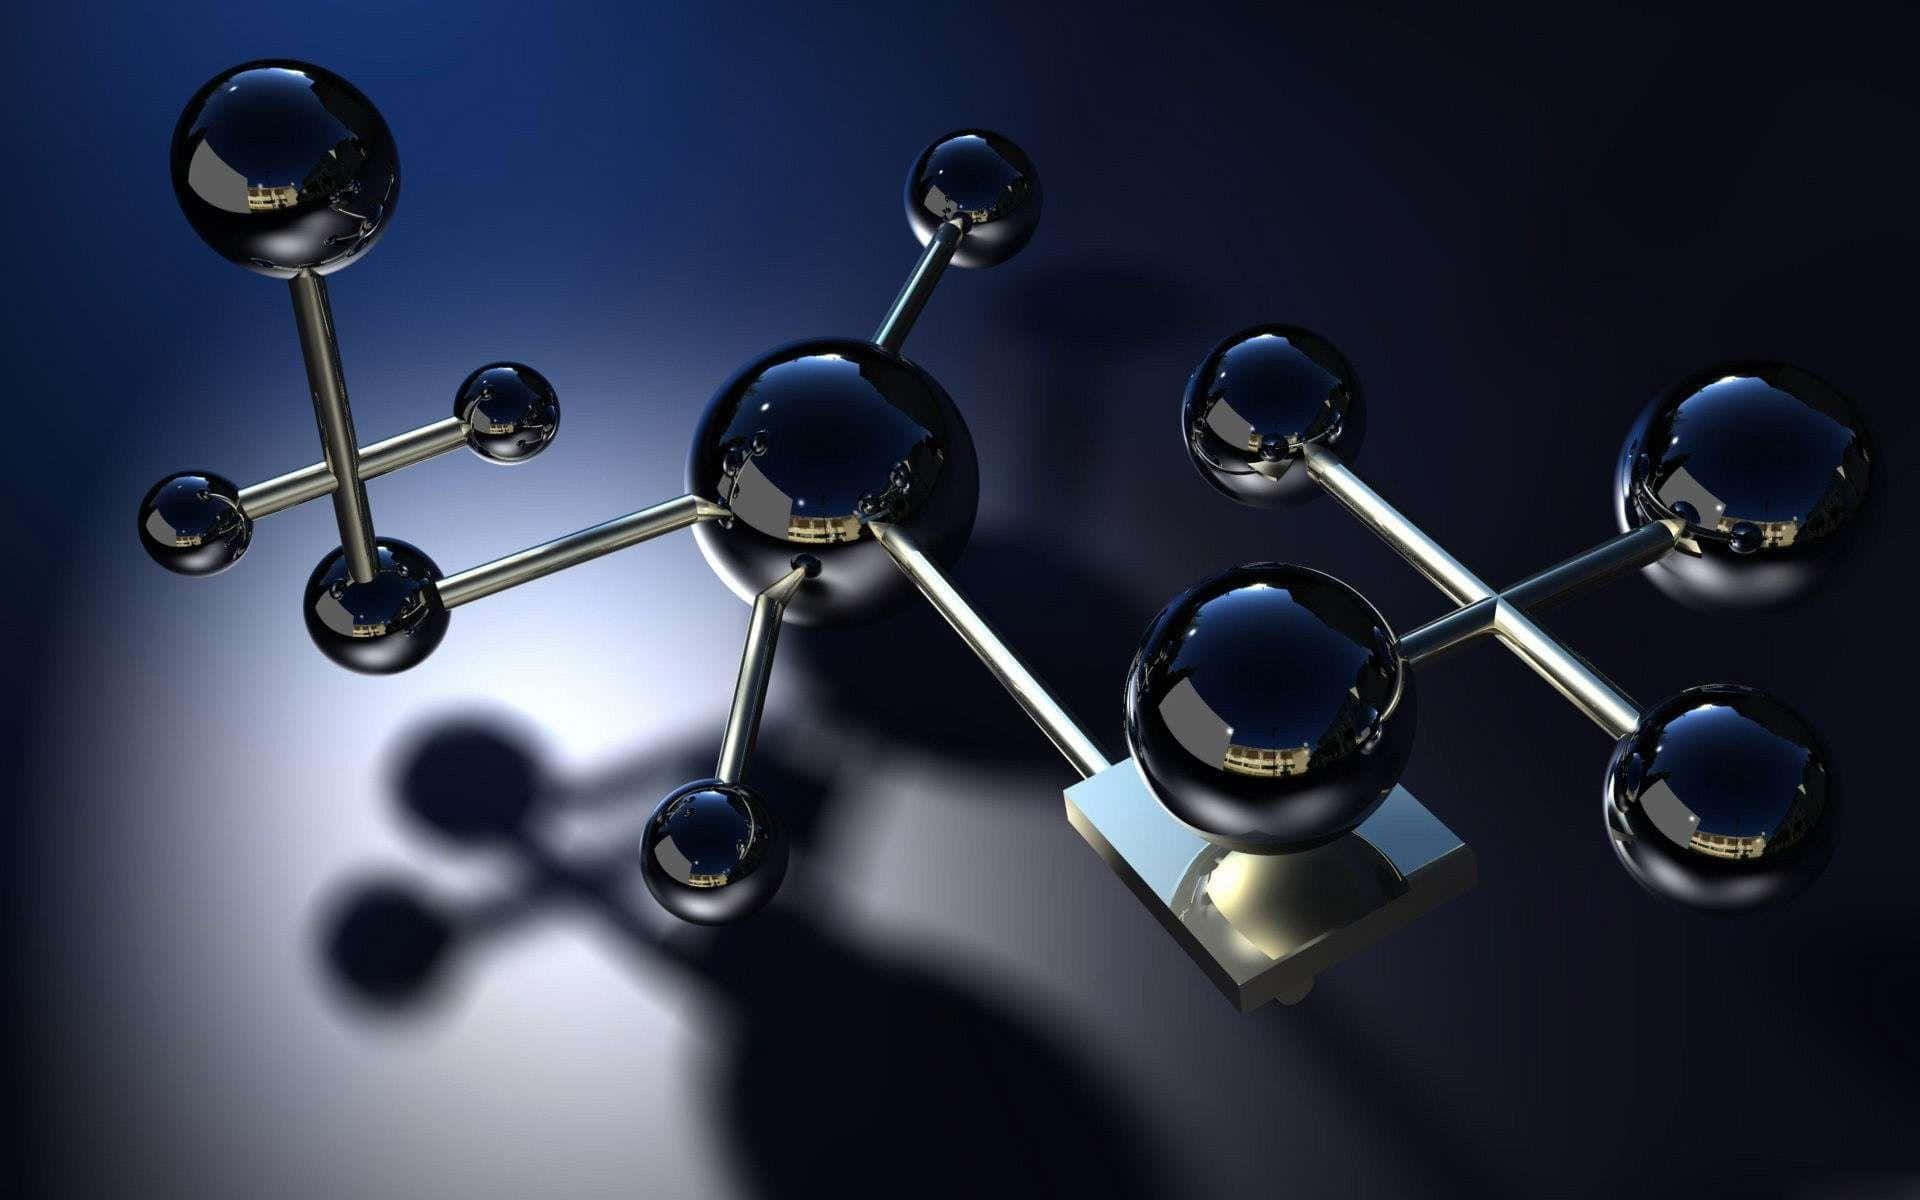 atomic structure wallpaper